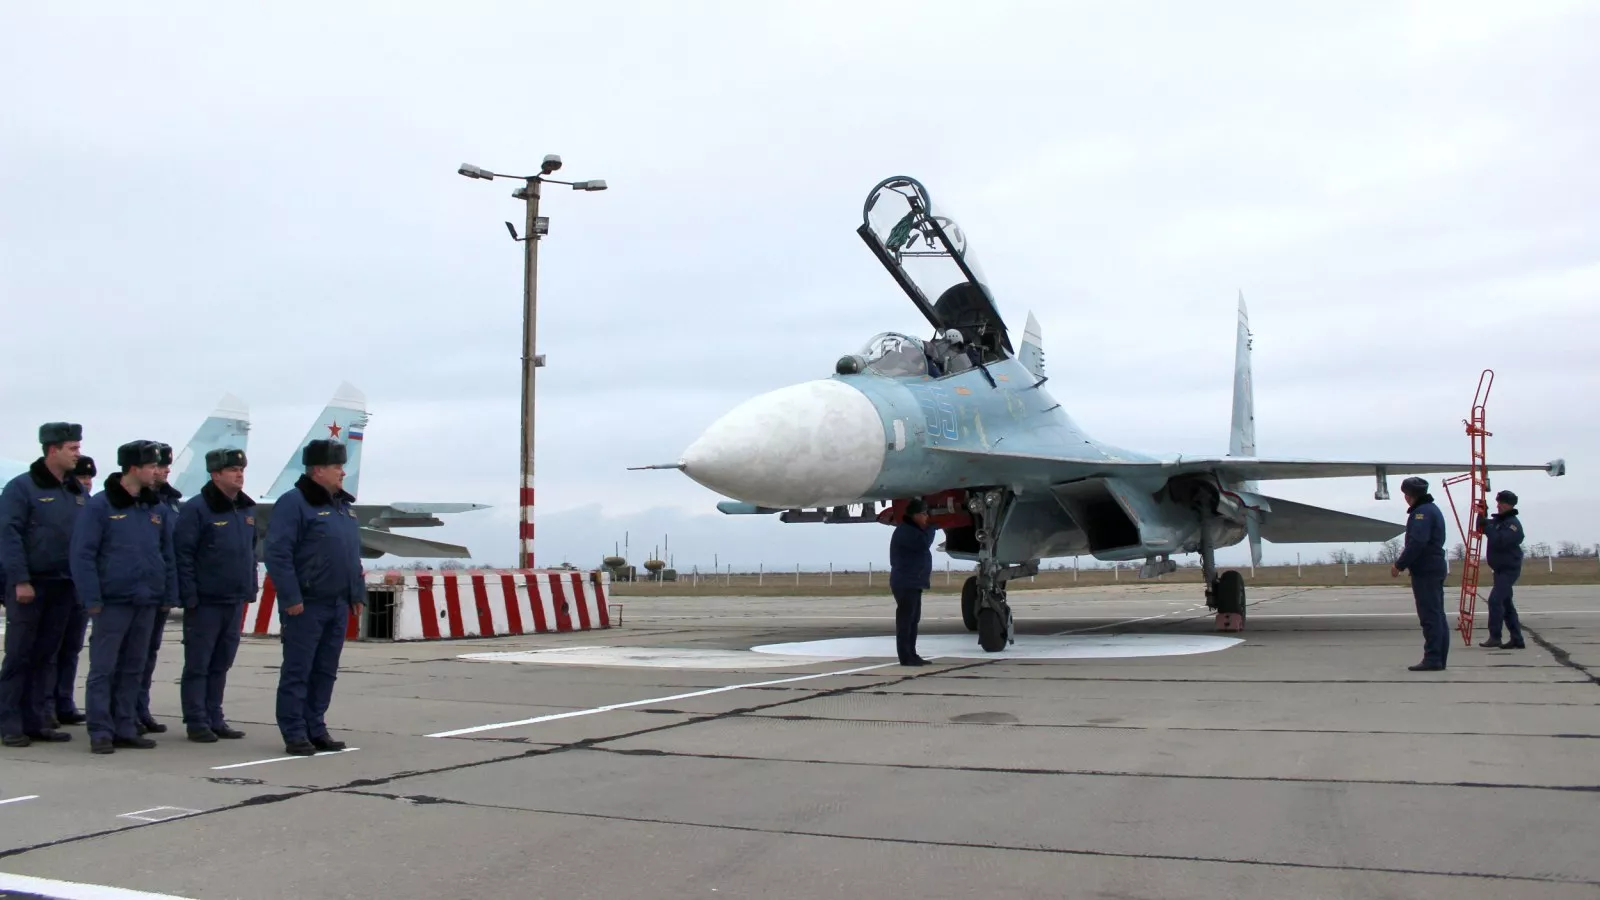 Explosions force Russia to pull planes from Crimean airbases: Ukraine